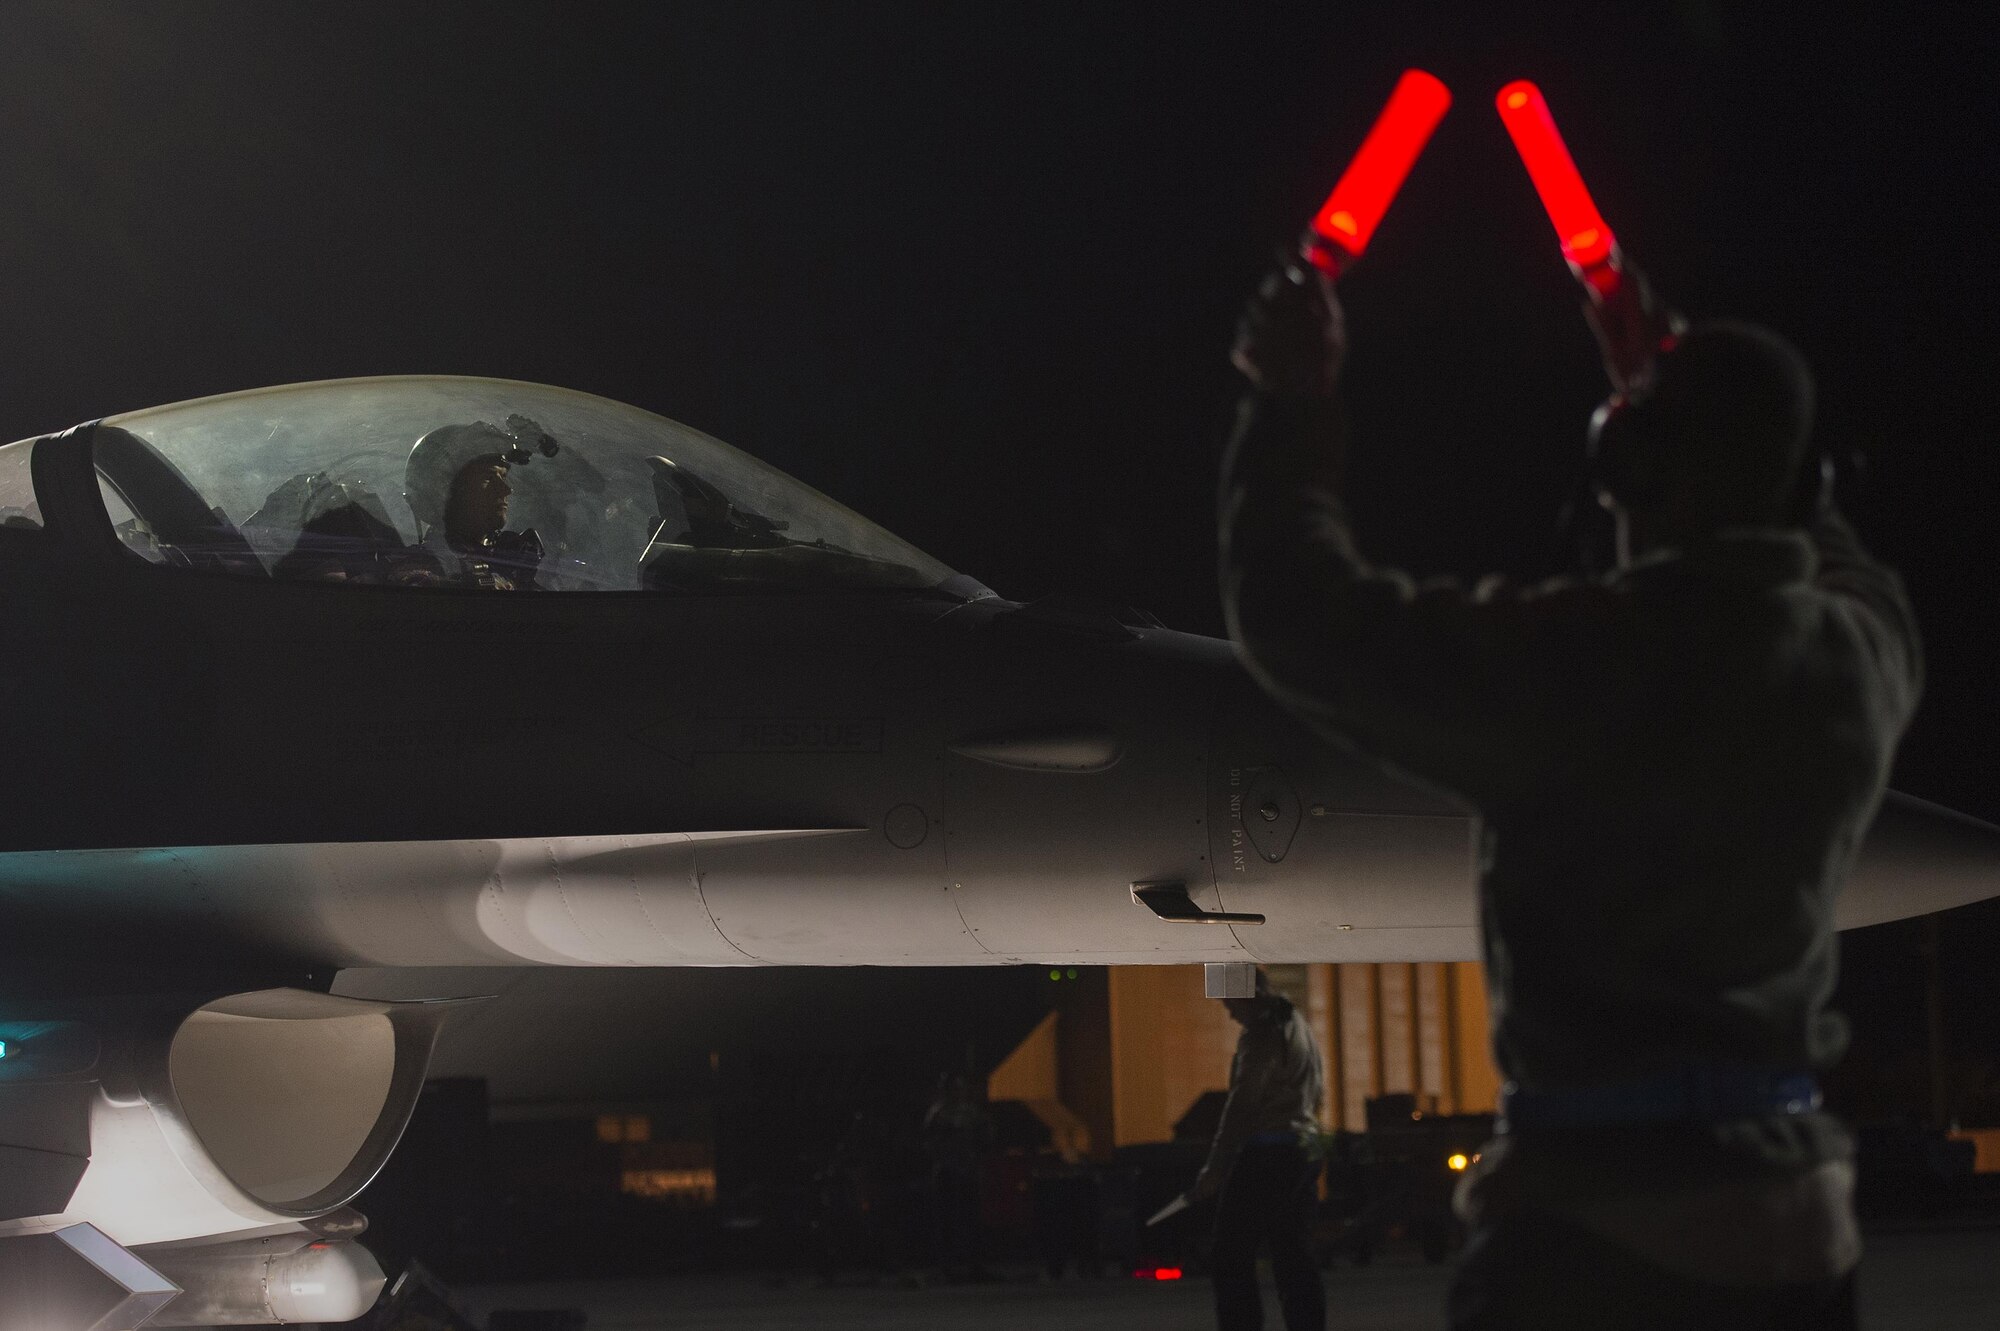 A U.S. Air Force pilot assigned to the 55th Fighter Squadron taxis onto the runway in preparation for a nighttime flying mission in support of Red Flag 17-2 at Nellis Air Force Base, Nev., Feb. 28, 2017. In addition to daytime operations, Red Flag conducts training exercises during hours of darkness to train for low-visibility environments. (U.S. Air Force photo by Senior Airman Zade Vadnais)